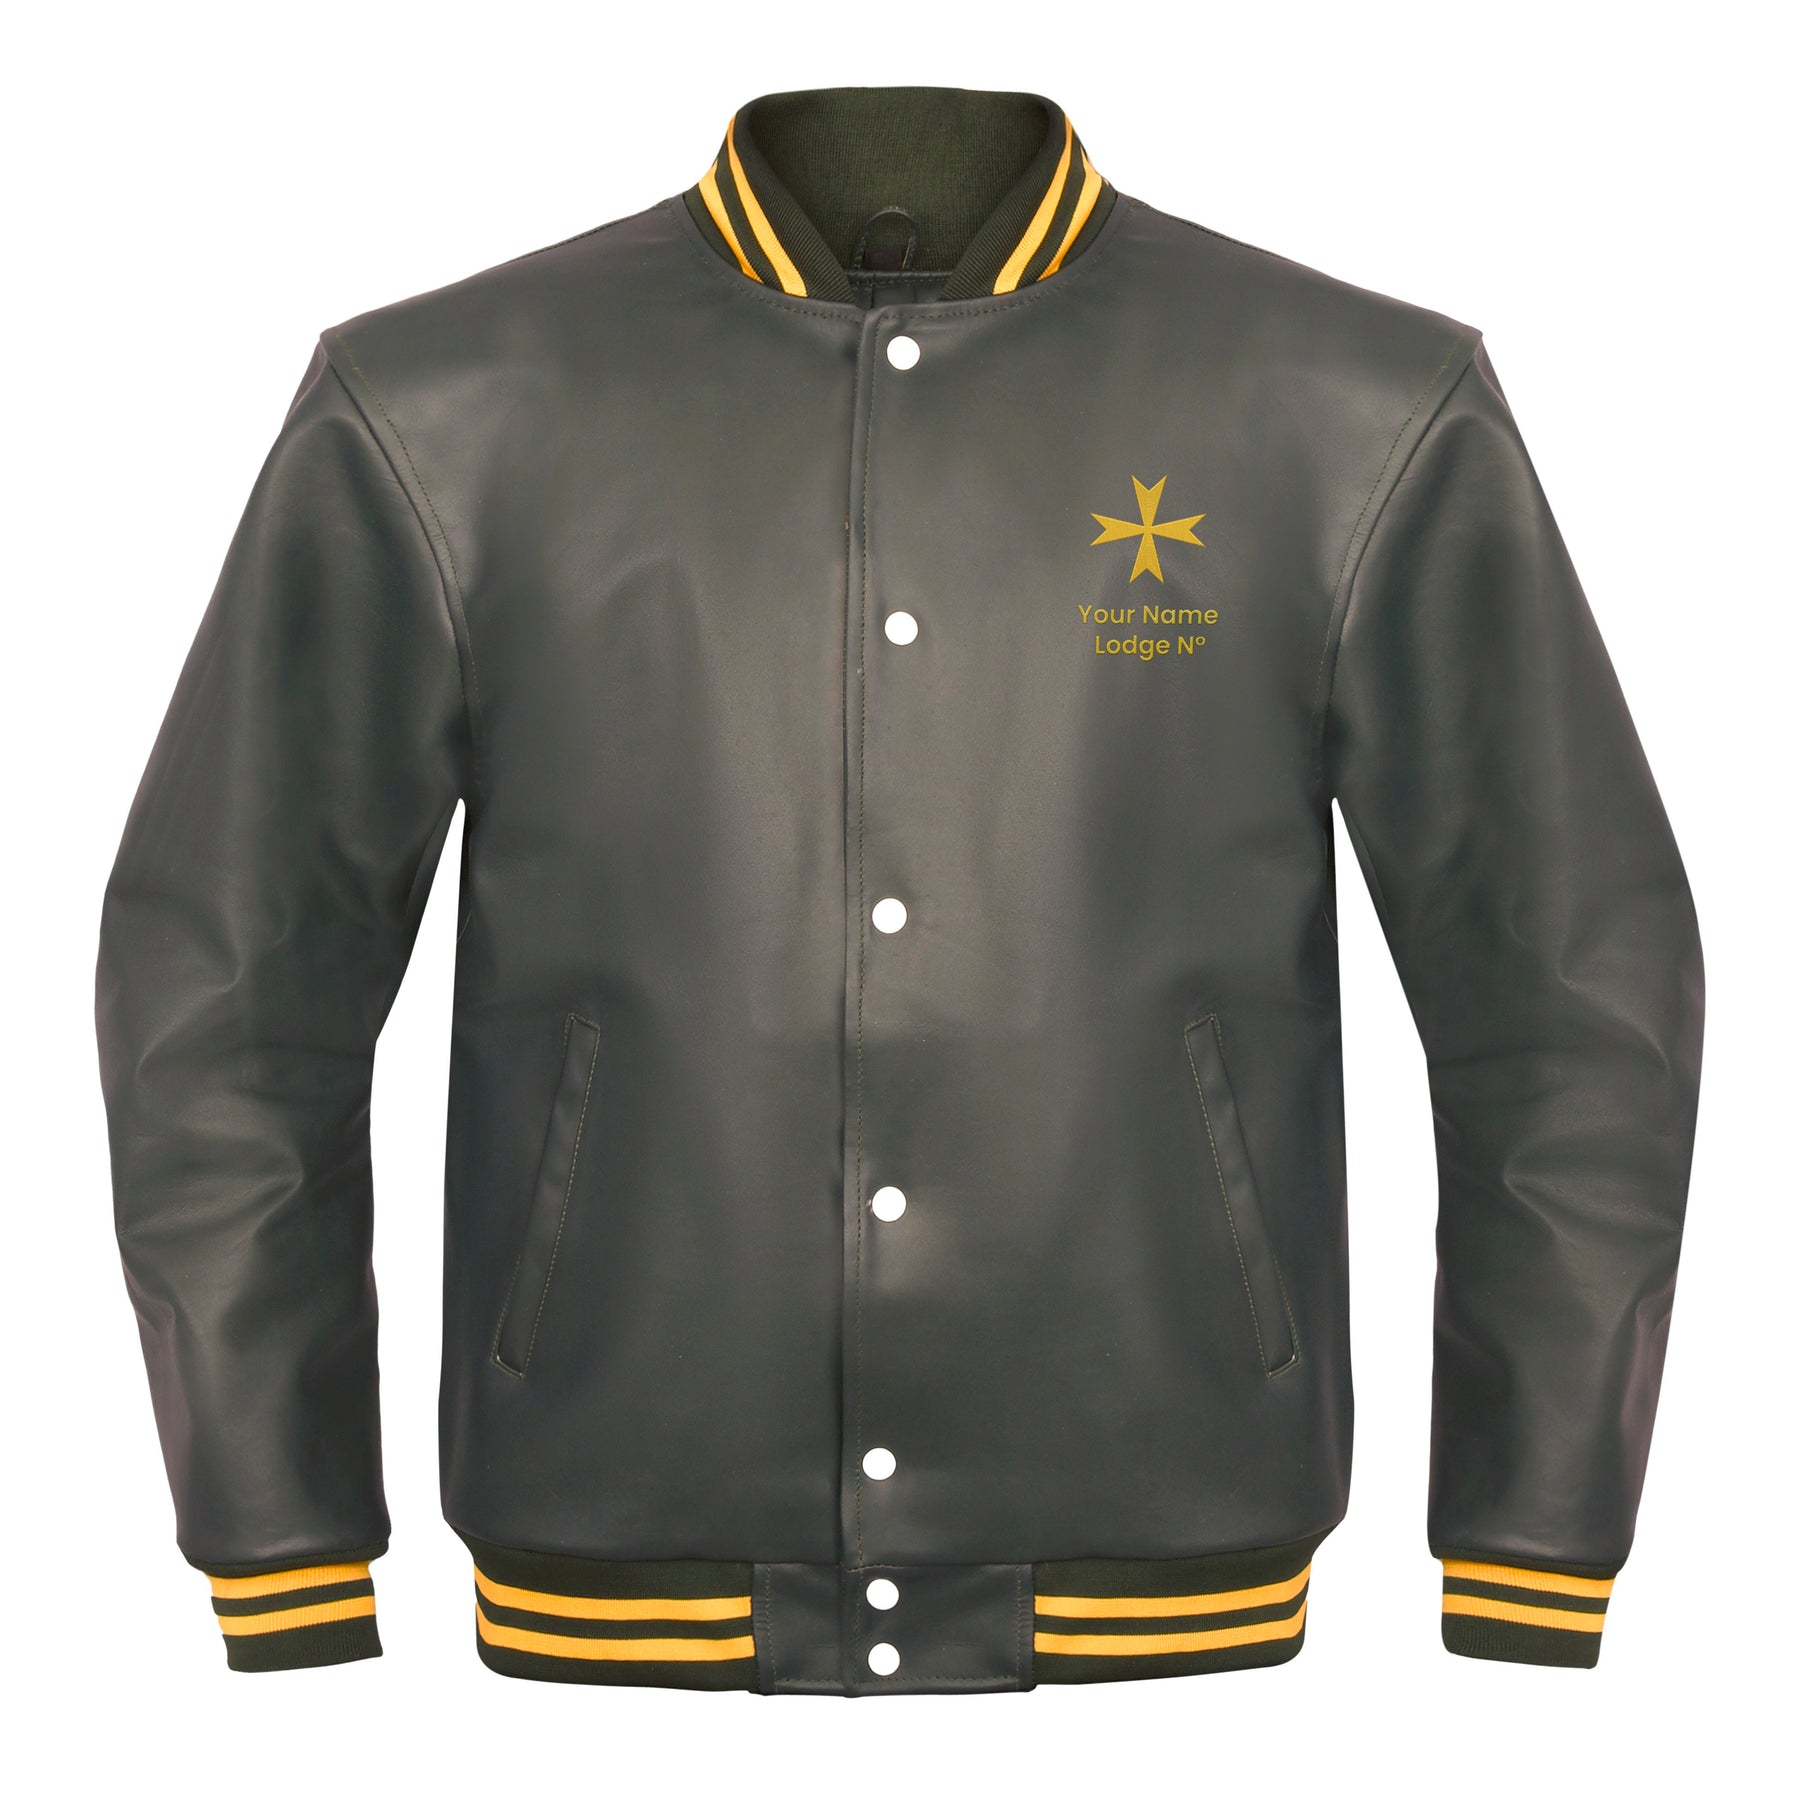 Order Of Malta Commandery Jacket - Leather With Customizable Gold Embroidery - Bricks Masons